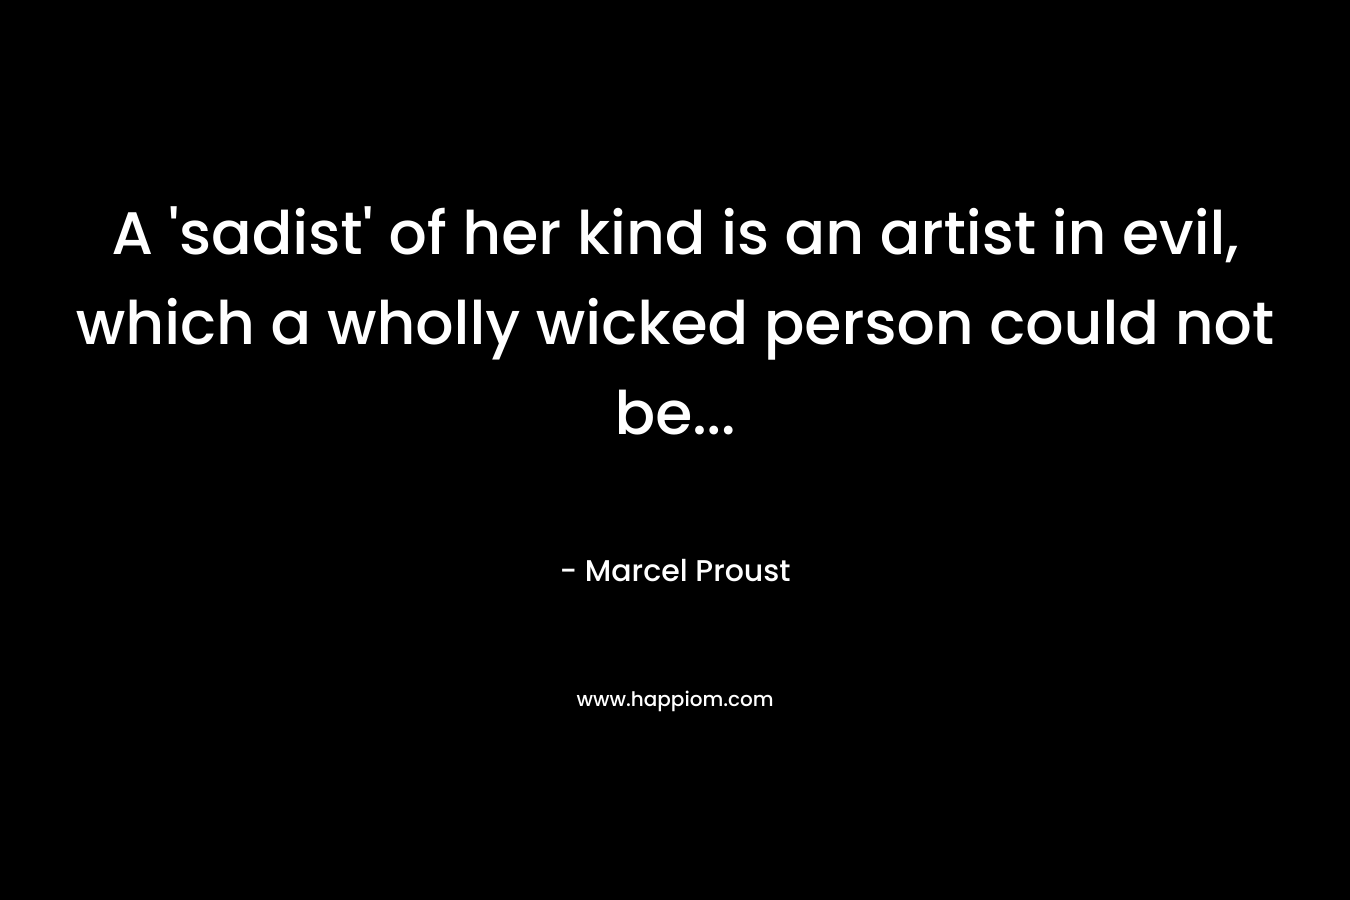 A ‘sadist’ of her kind is an artist in evil, which a wholly wicked person could not be… – Marcel Proust